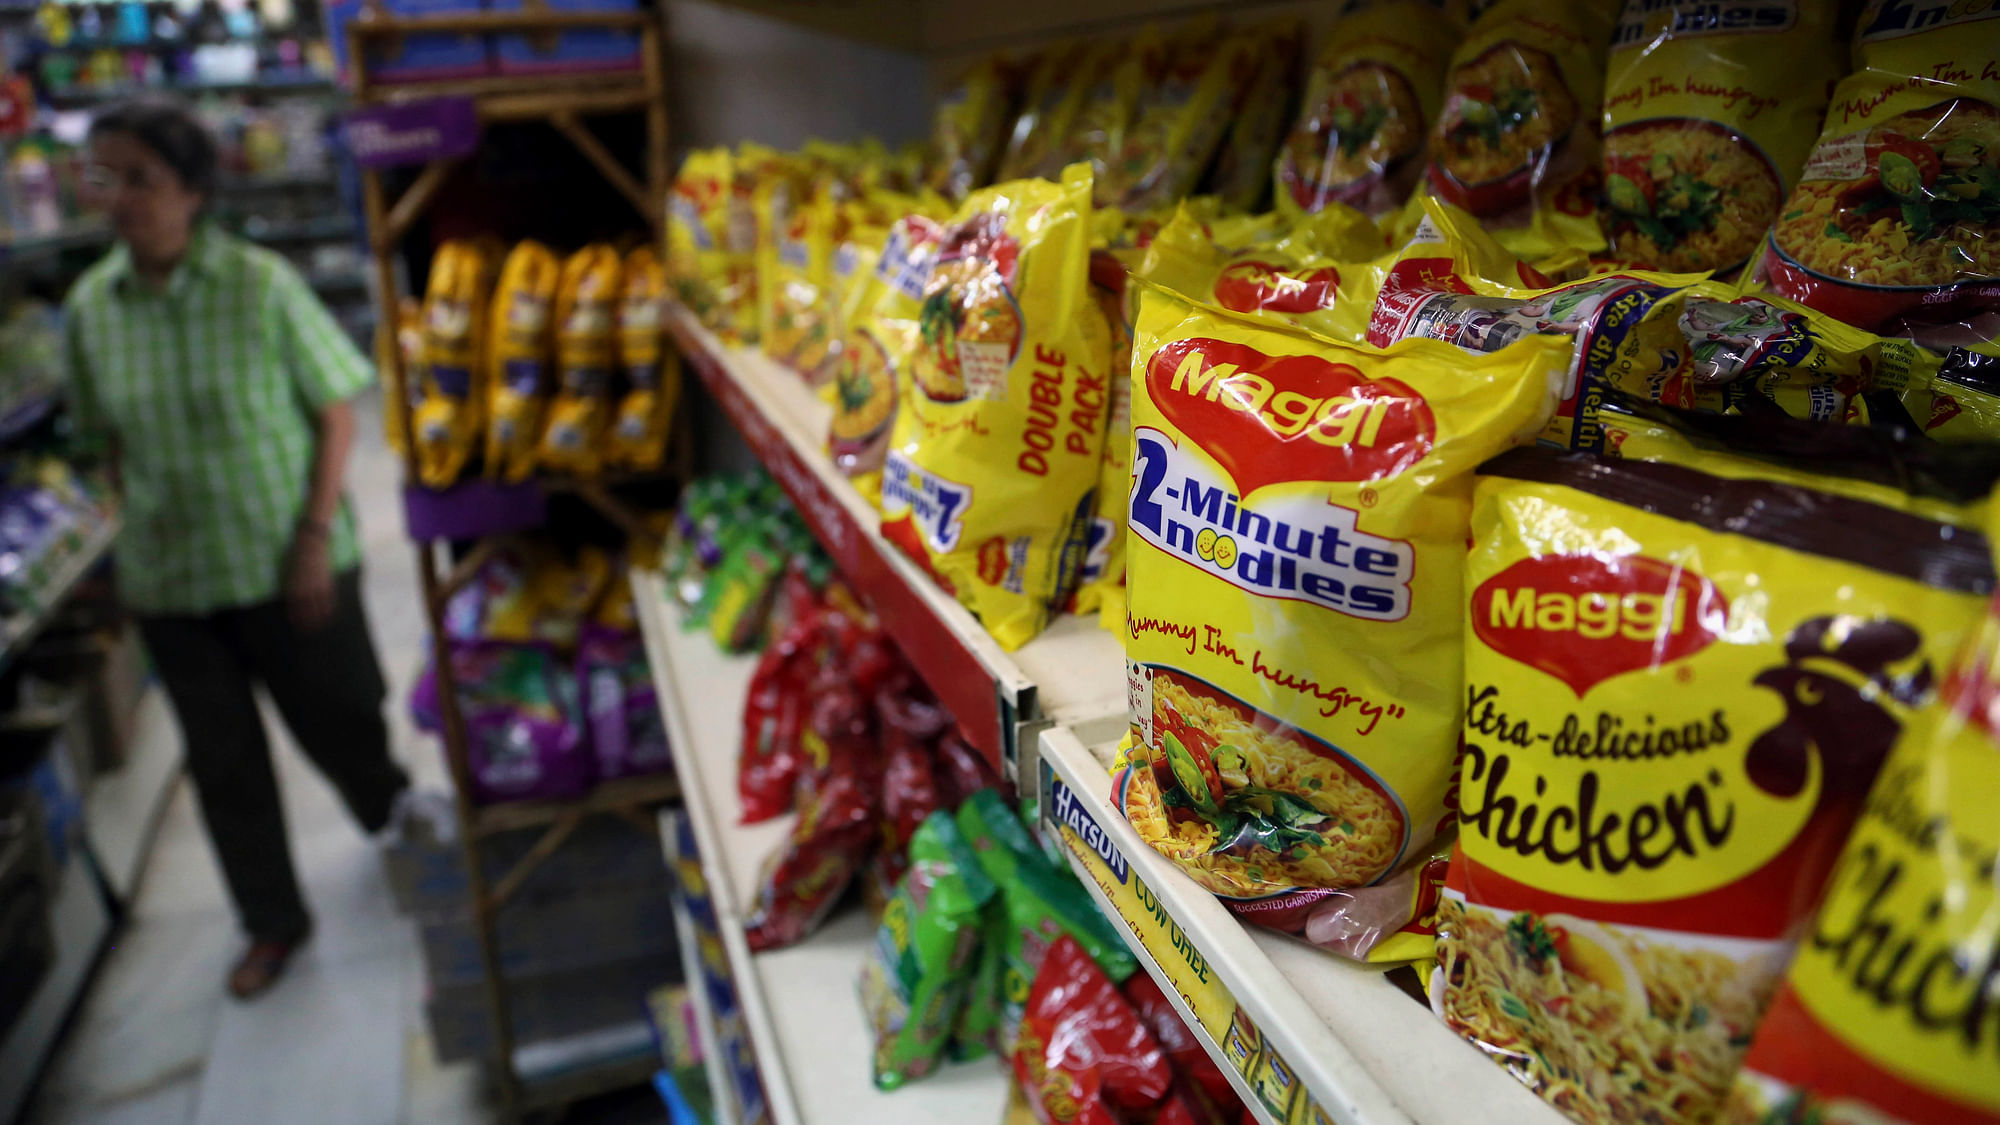 Supreme Court orders testing of samples of Maggi noodles at Mysore laboratory in pursuance of the direction of apex consumer panel.&nbsp;(Photo: AP)